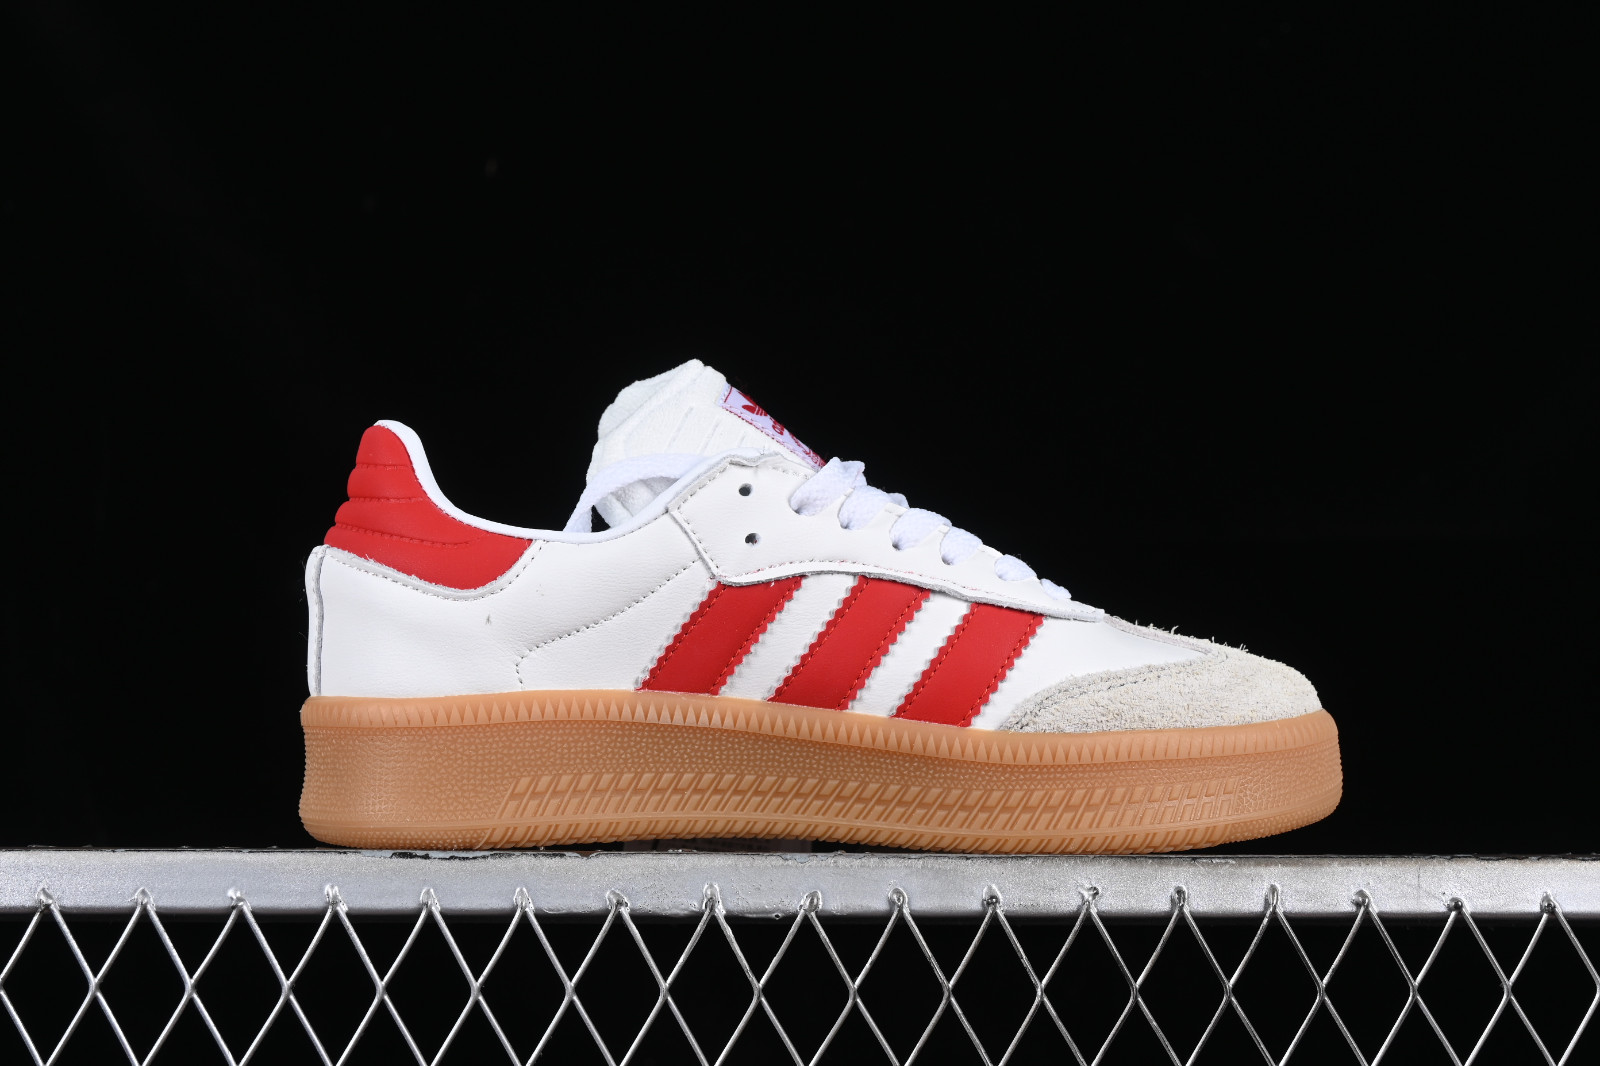 Adidas Samba XLG Cloud White Red Gum IE1374 - Other Adidas - Sepcleat